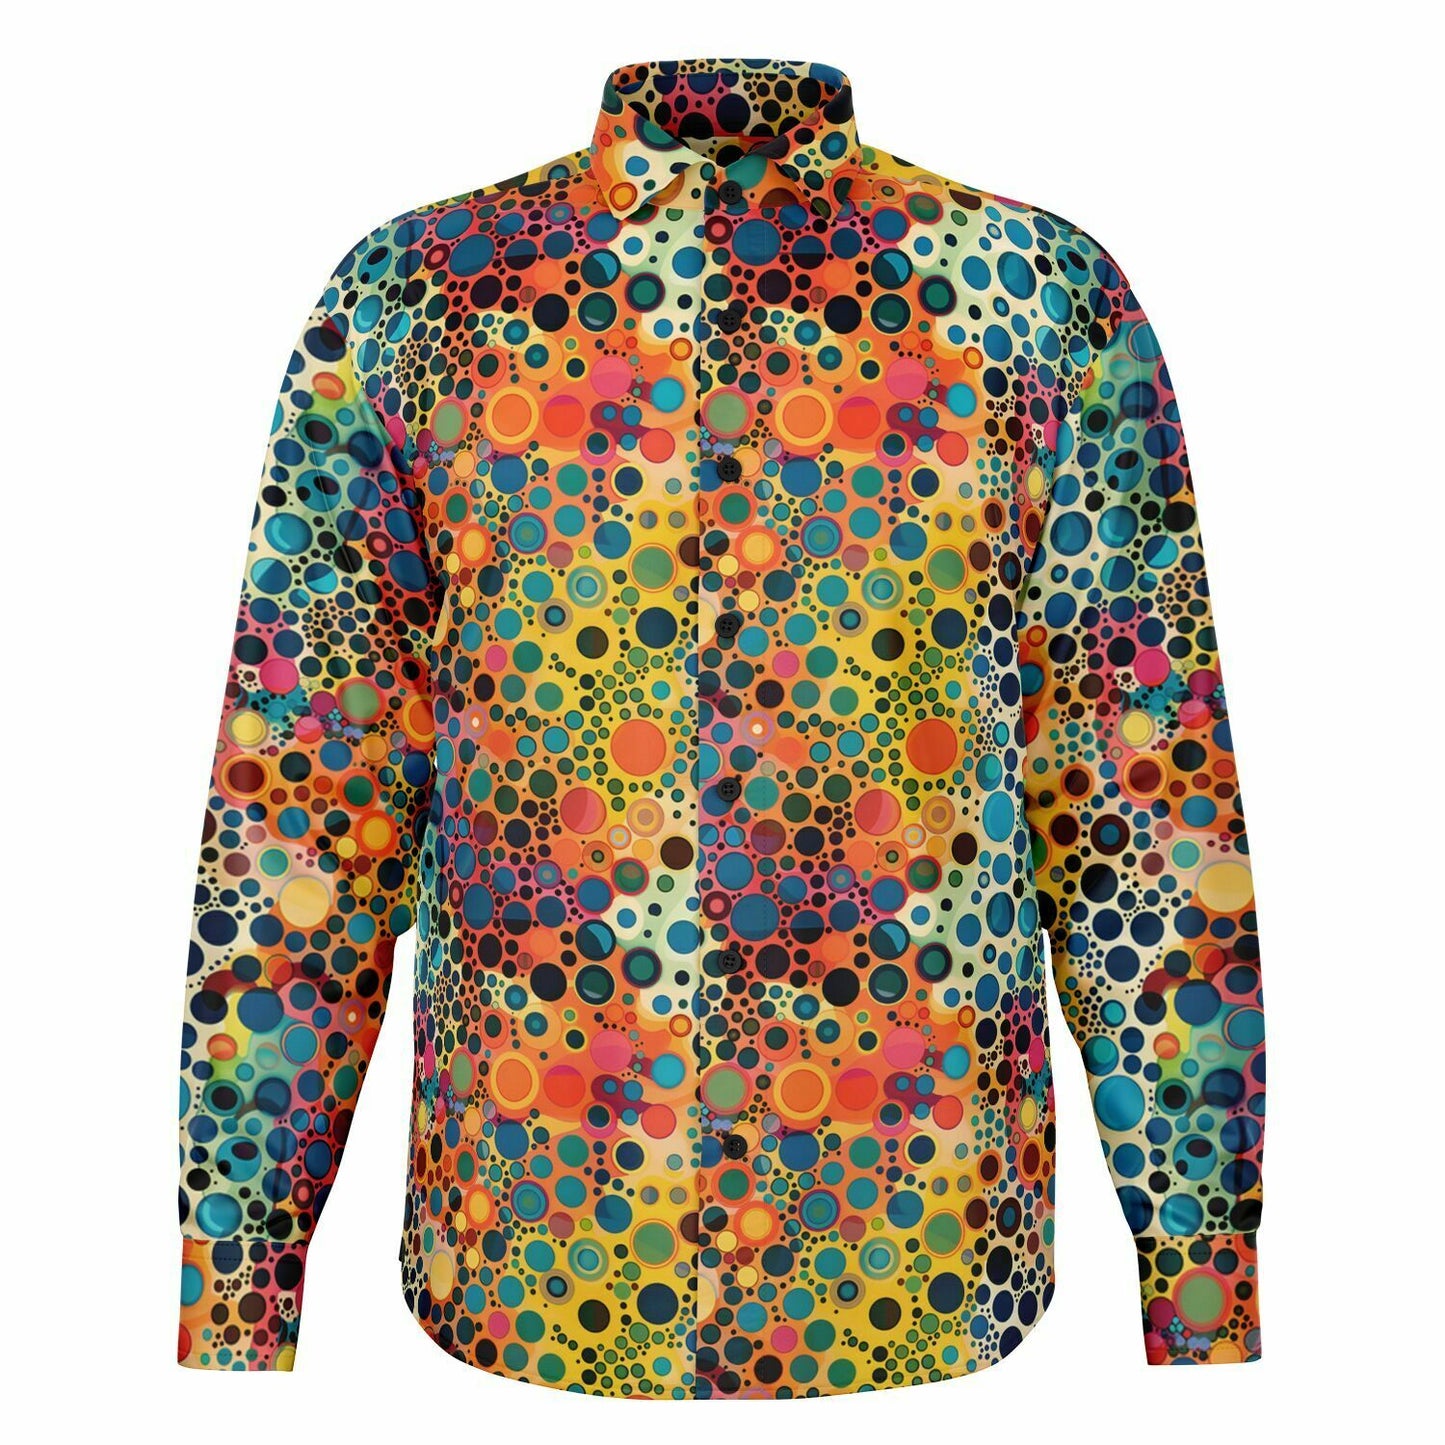 Psychedelic Long Sleeve Men Button Up Shirt, Funky Trippy Fun Festival Retro Vintage Guys Male Print Buttoned Down Collared Graphic Casual